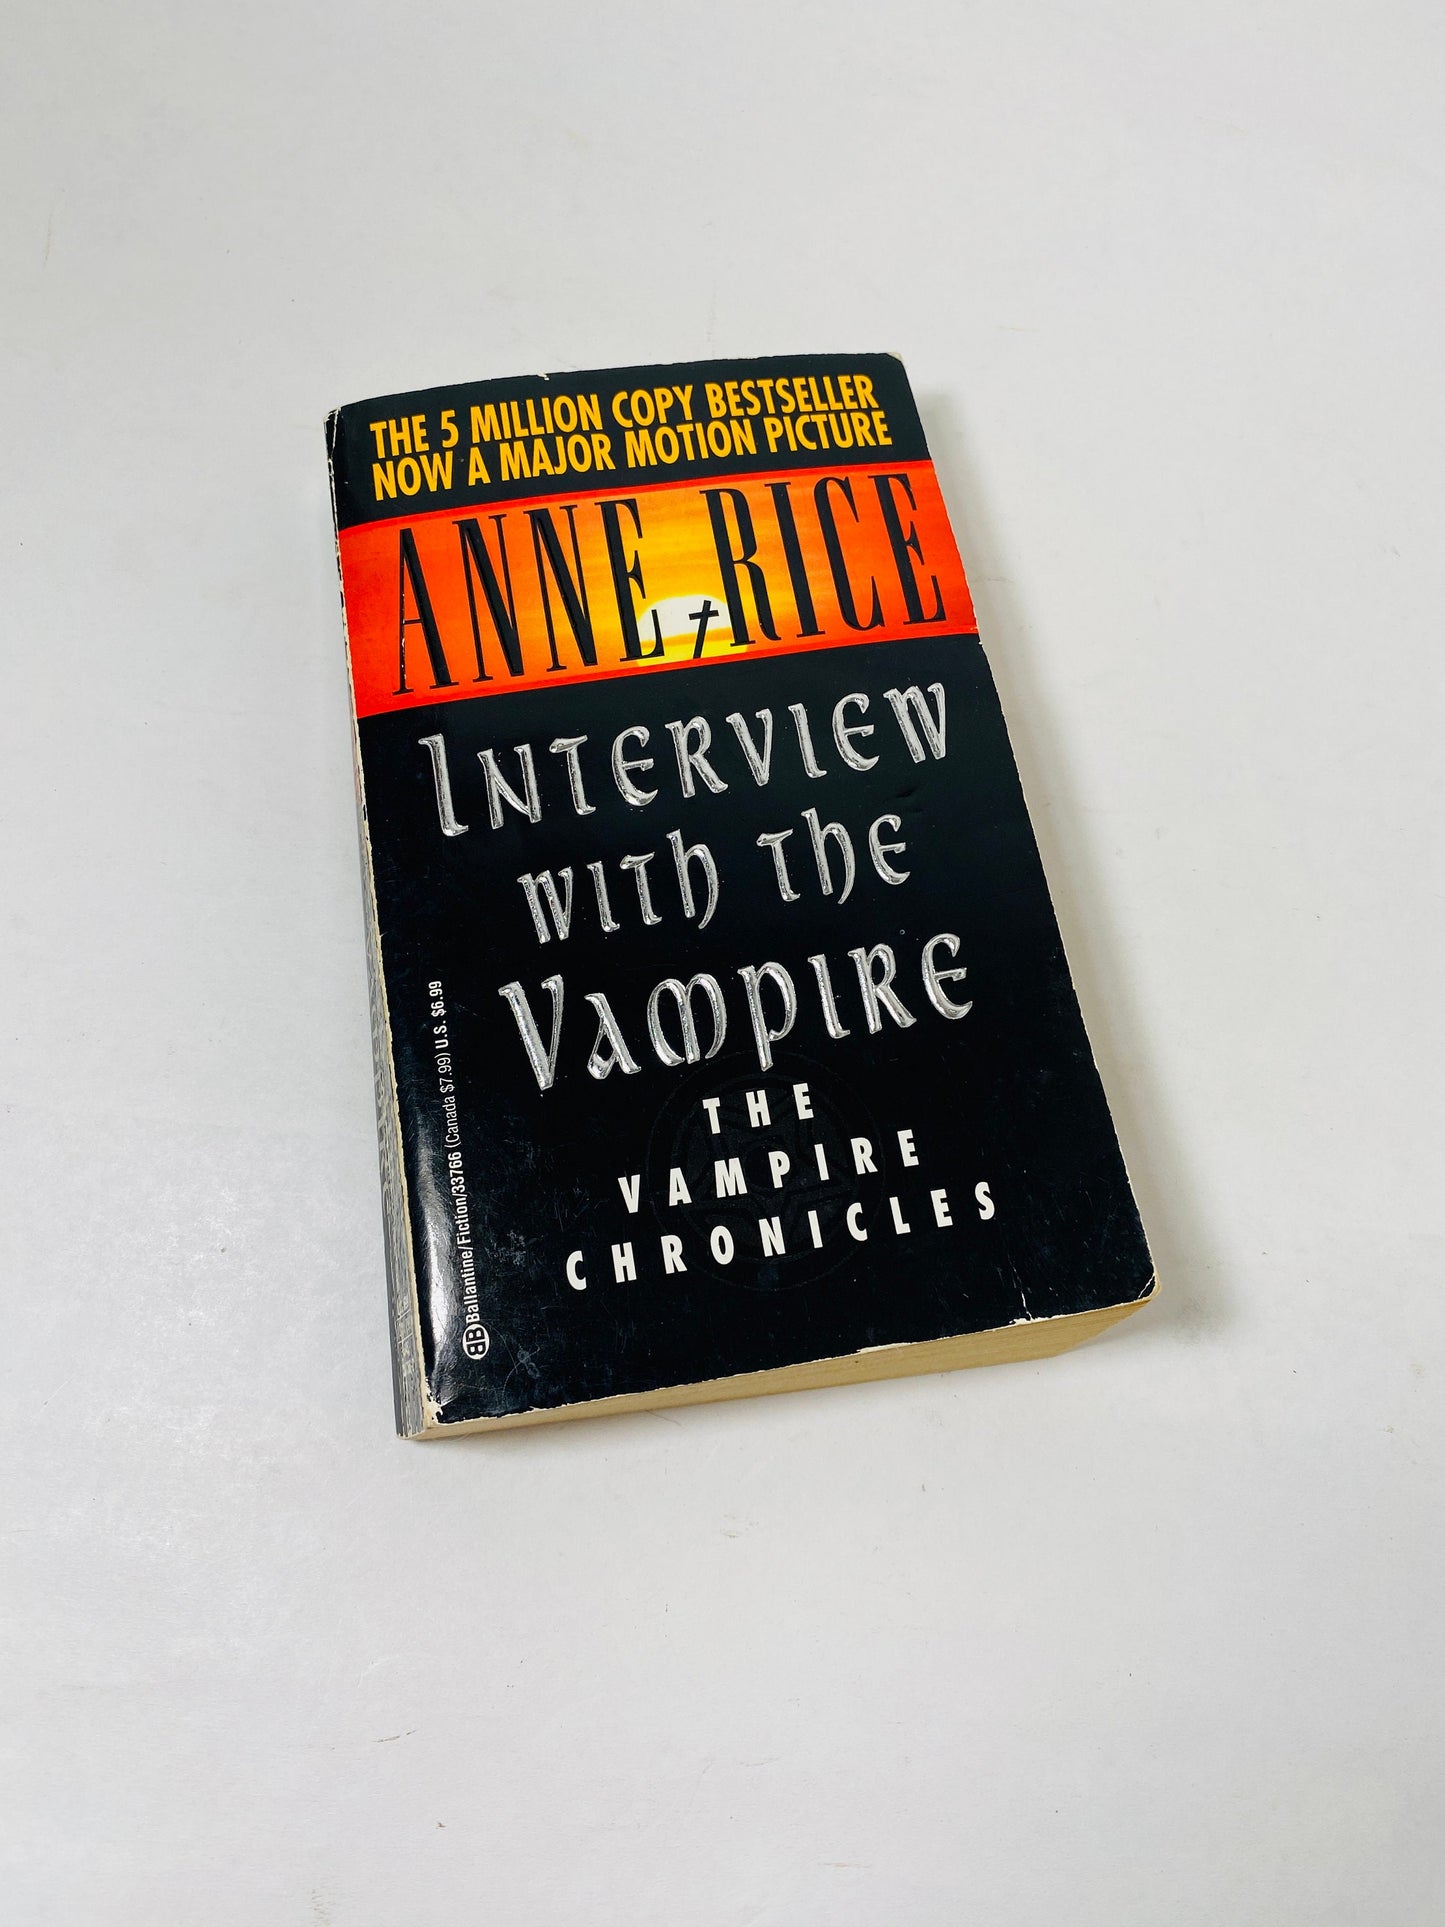 Interview with a Vampire by Anne Rice. Early Printing vintage paperback circa 1981. Historical horror. Gold book decor. Collectible gift.